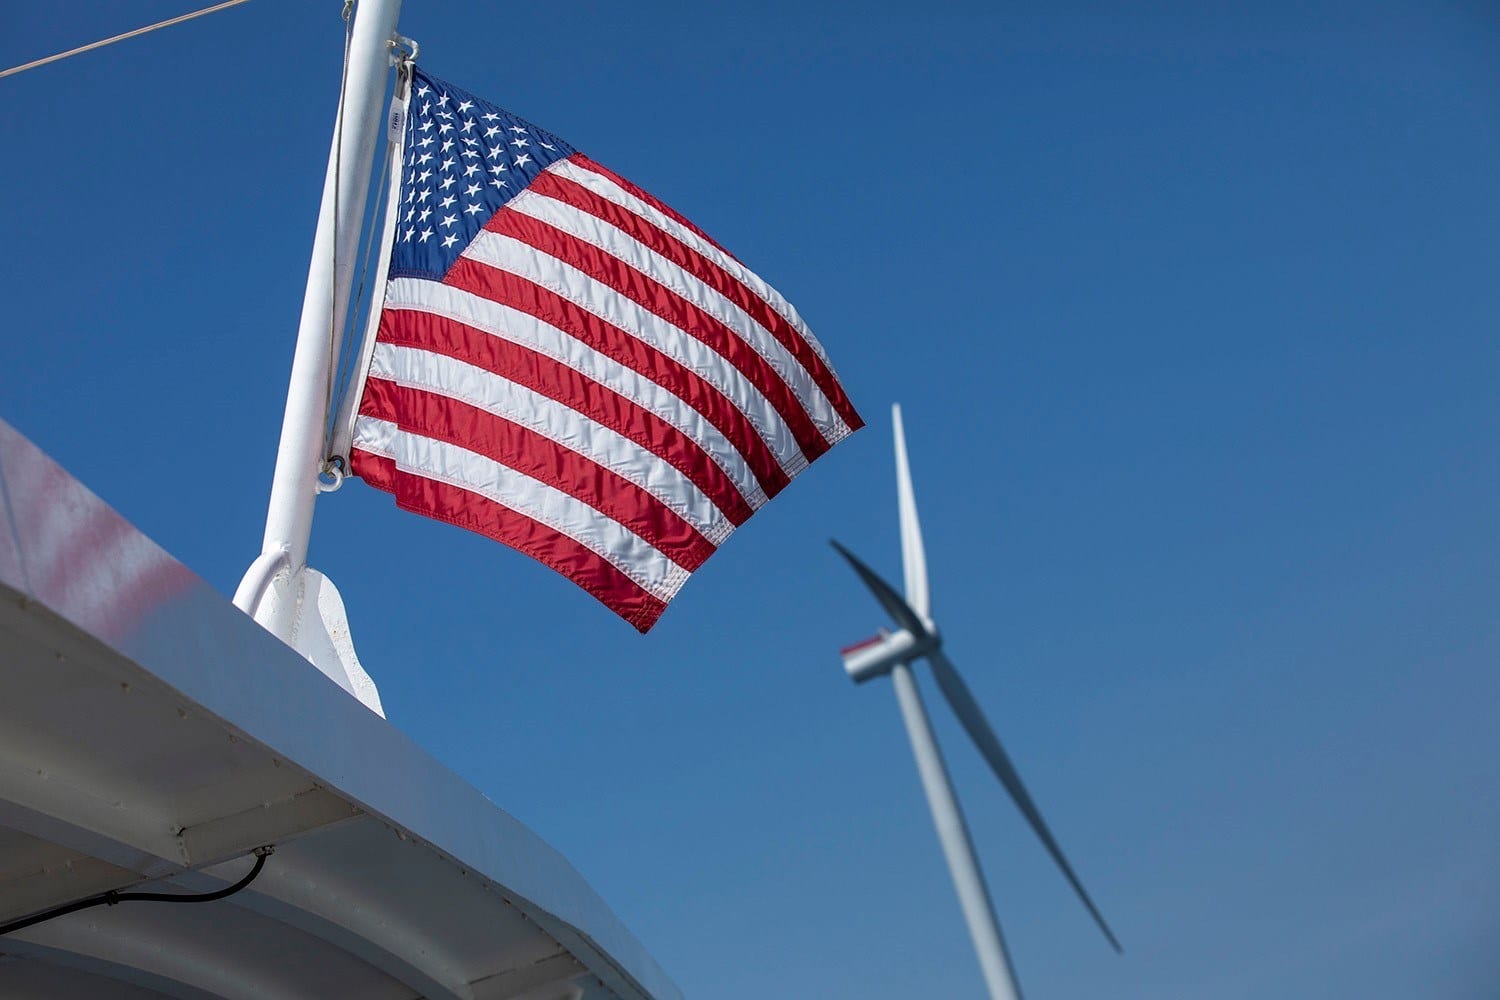 Offshore Wind Manufacturing Jobs Likely to Take ‘Several Years’ to Land in U.S.